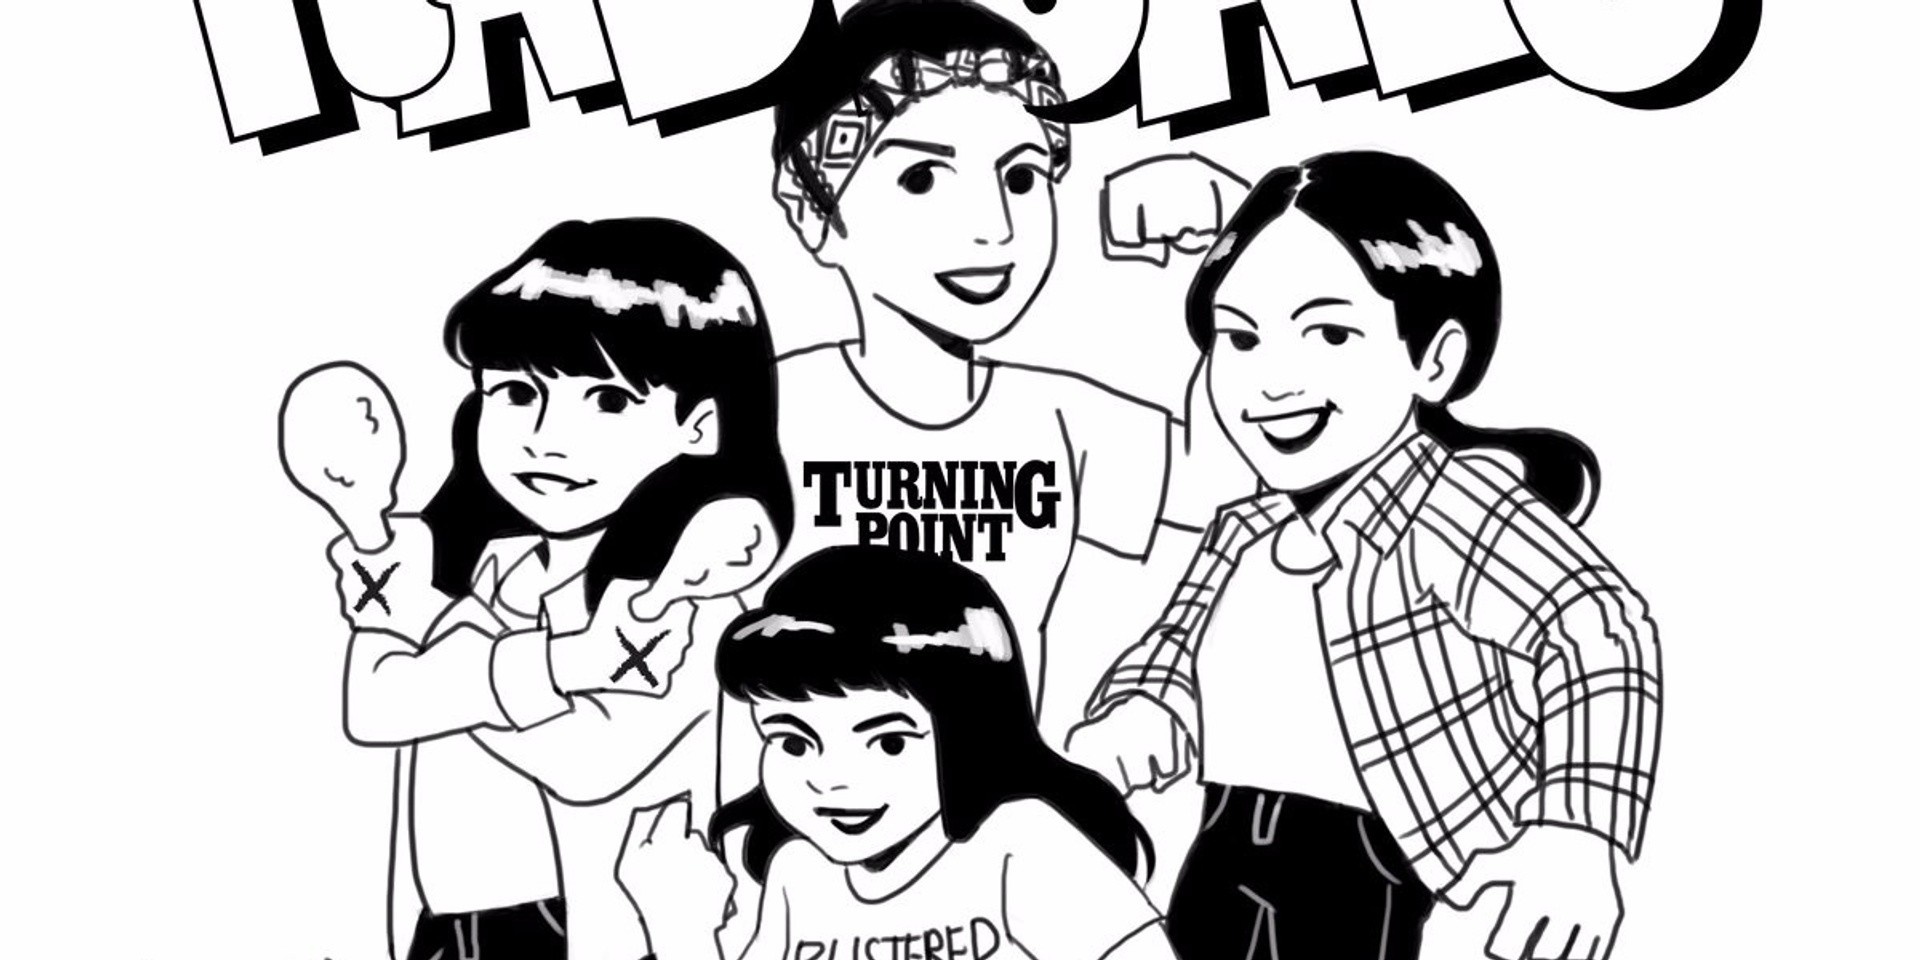 LISTEN: Radigals' rousing brand of all-girl hardcore empowers on their fantastic FIGHT TO UNITE EP